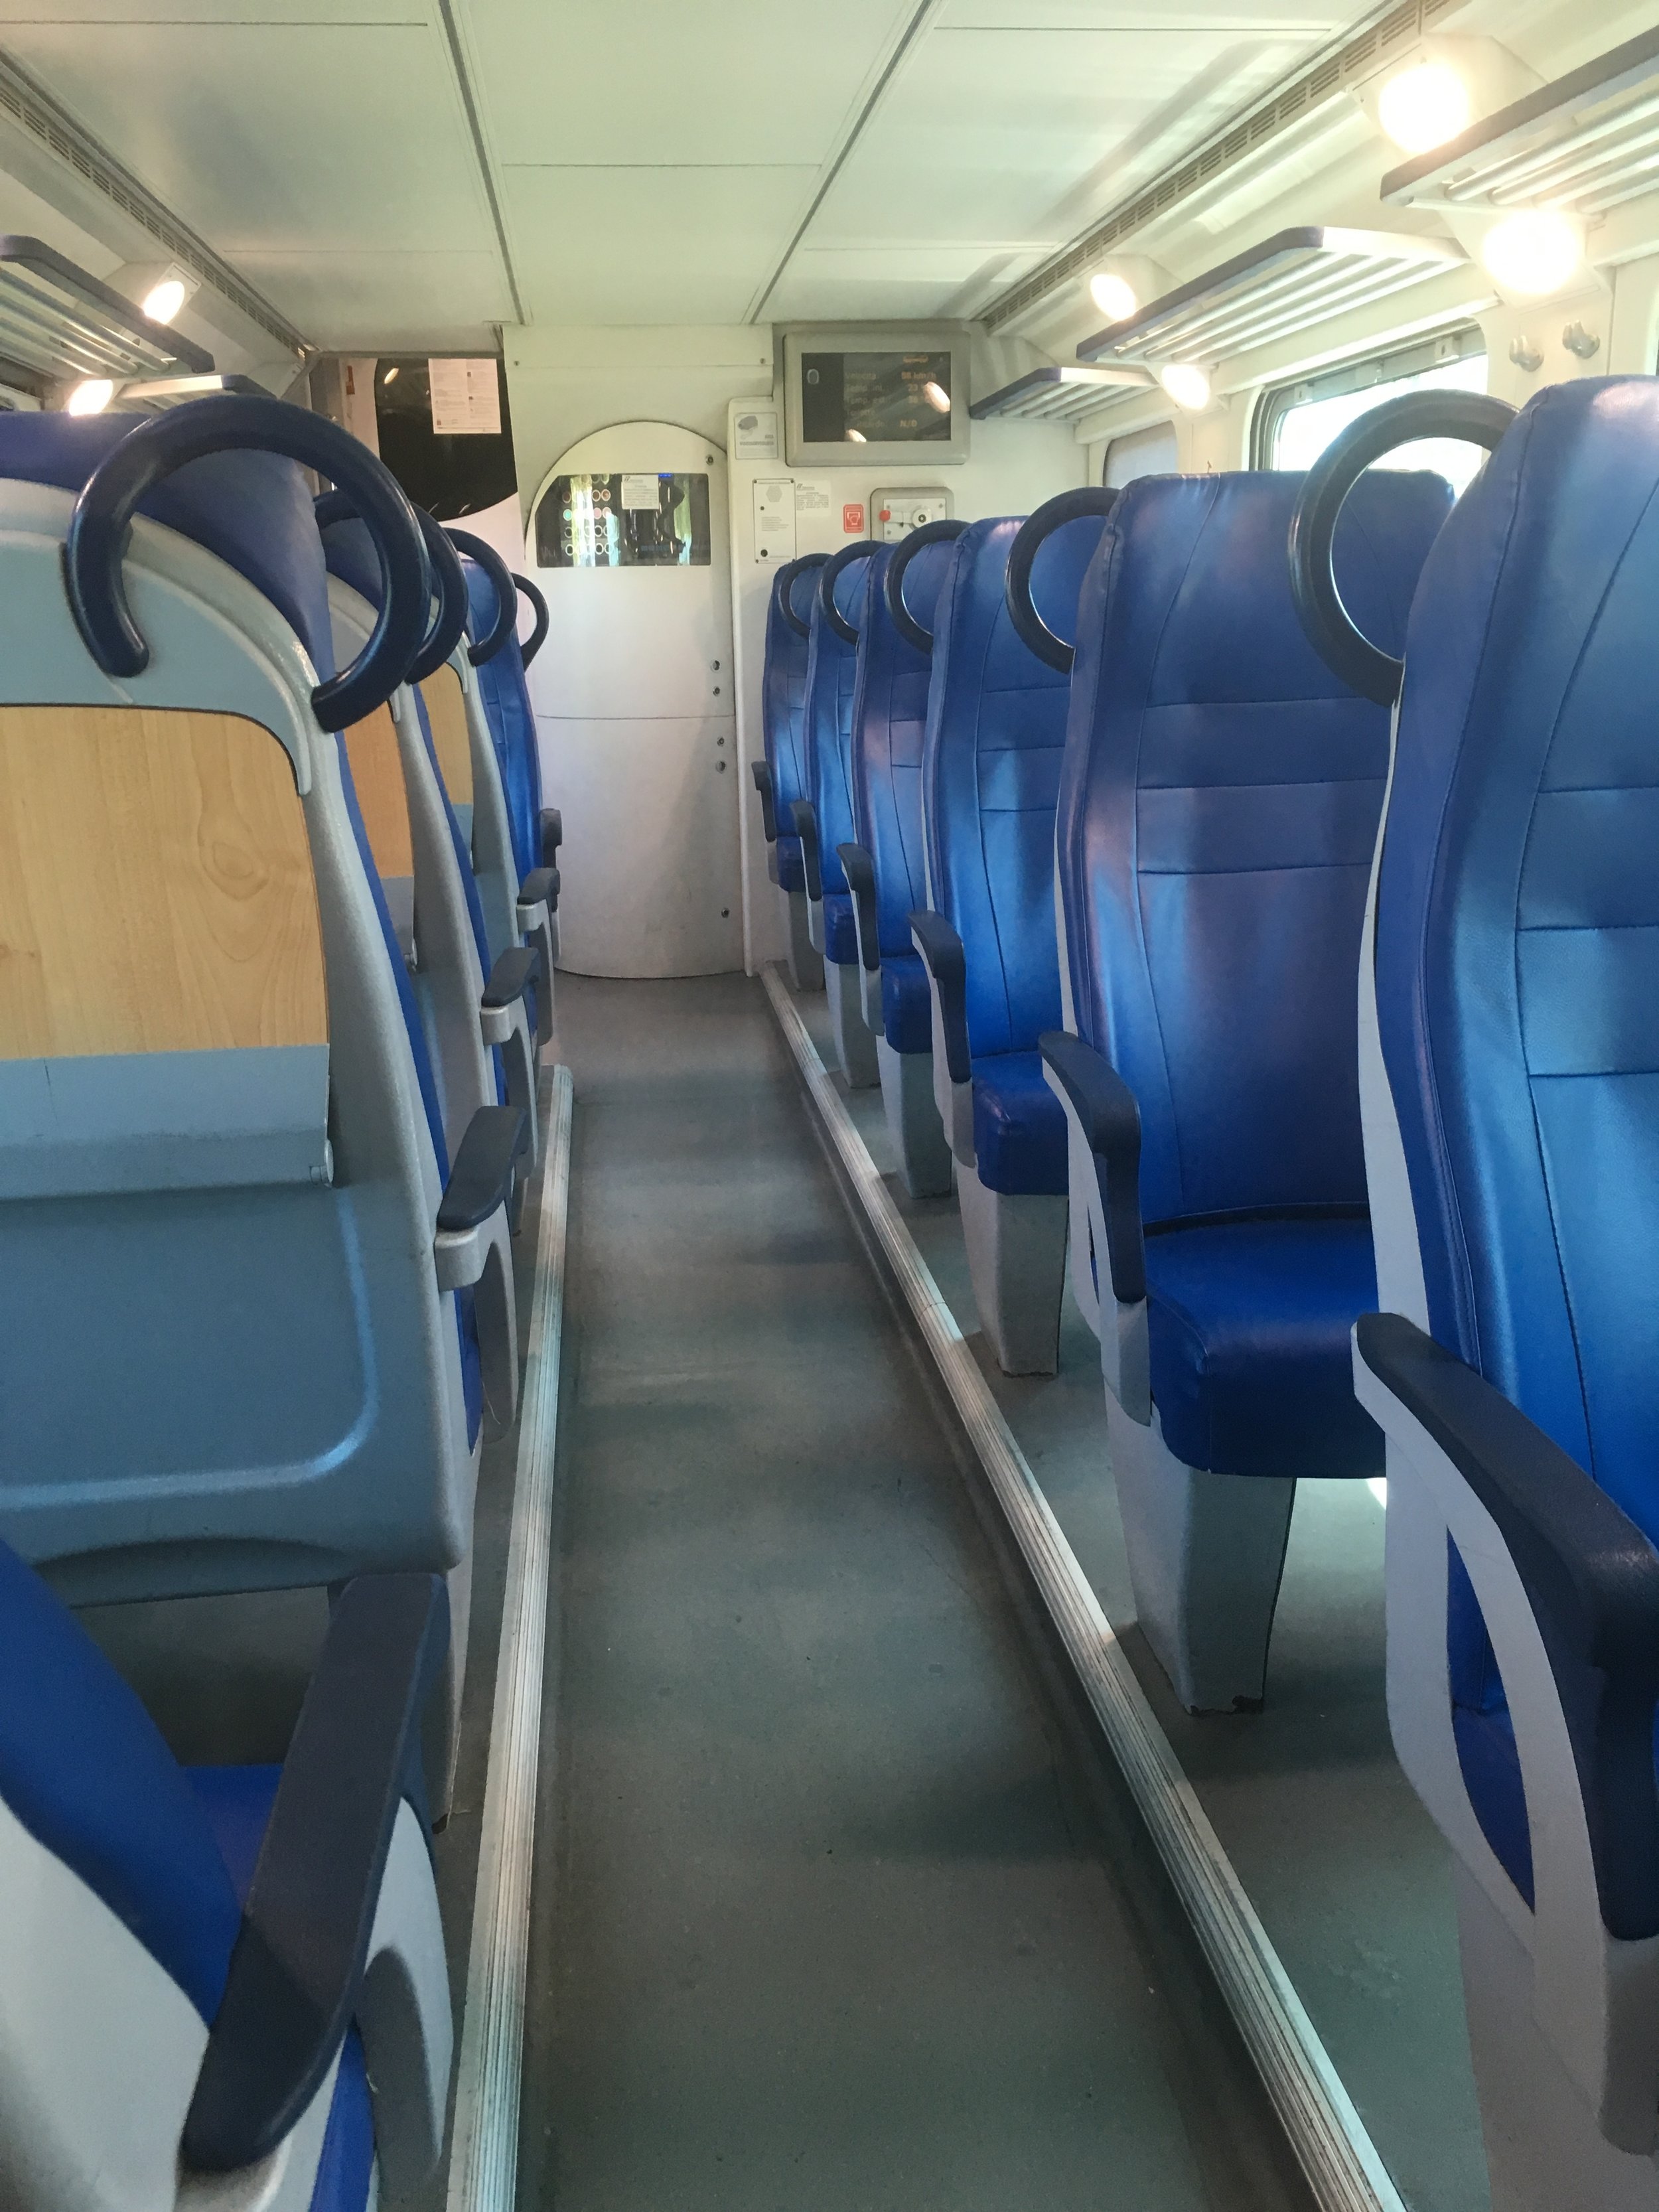 The inside of the train.